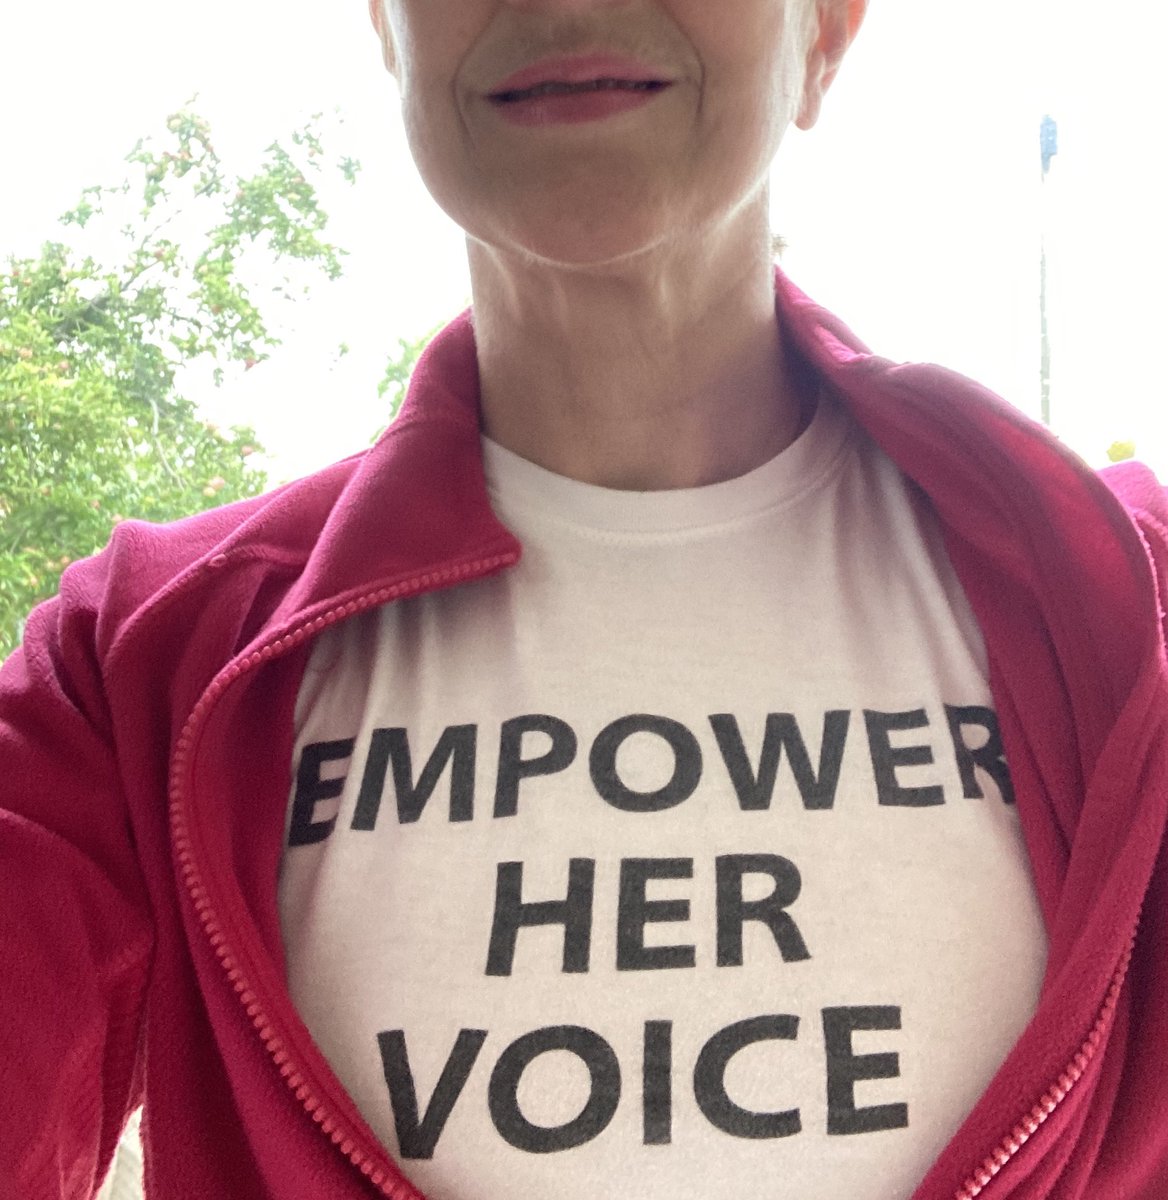 Got the T-shirt: Spreading the word on a park run ⁦@empowerhervoice⁩ started @cheltladiescoll⁩ and is now a global movement: 'The work being done by EmpowerHerVoice is vital and is benefitting girls around the globe'
Malala Yousafzai ⁦@GirlUp⁩ #empower